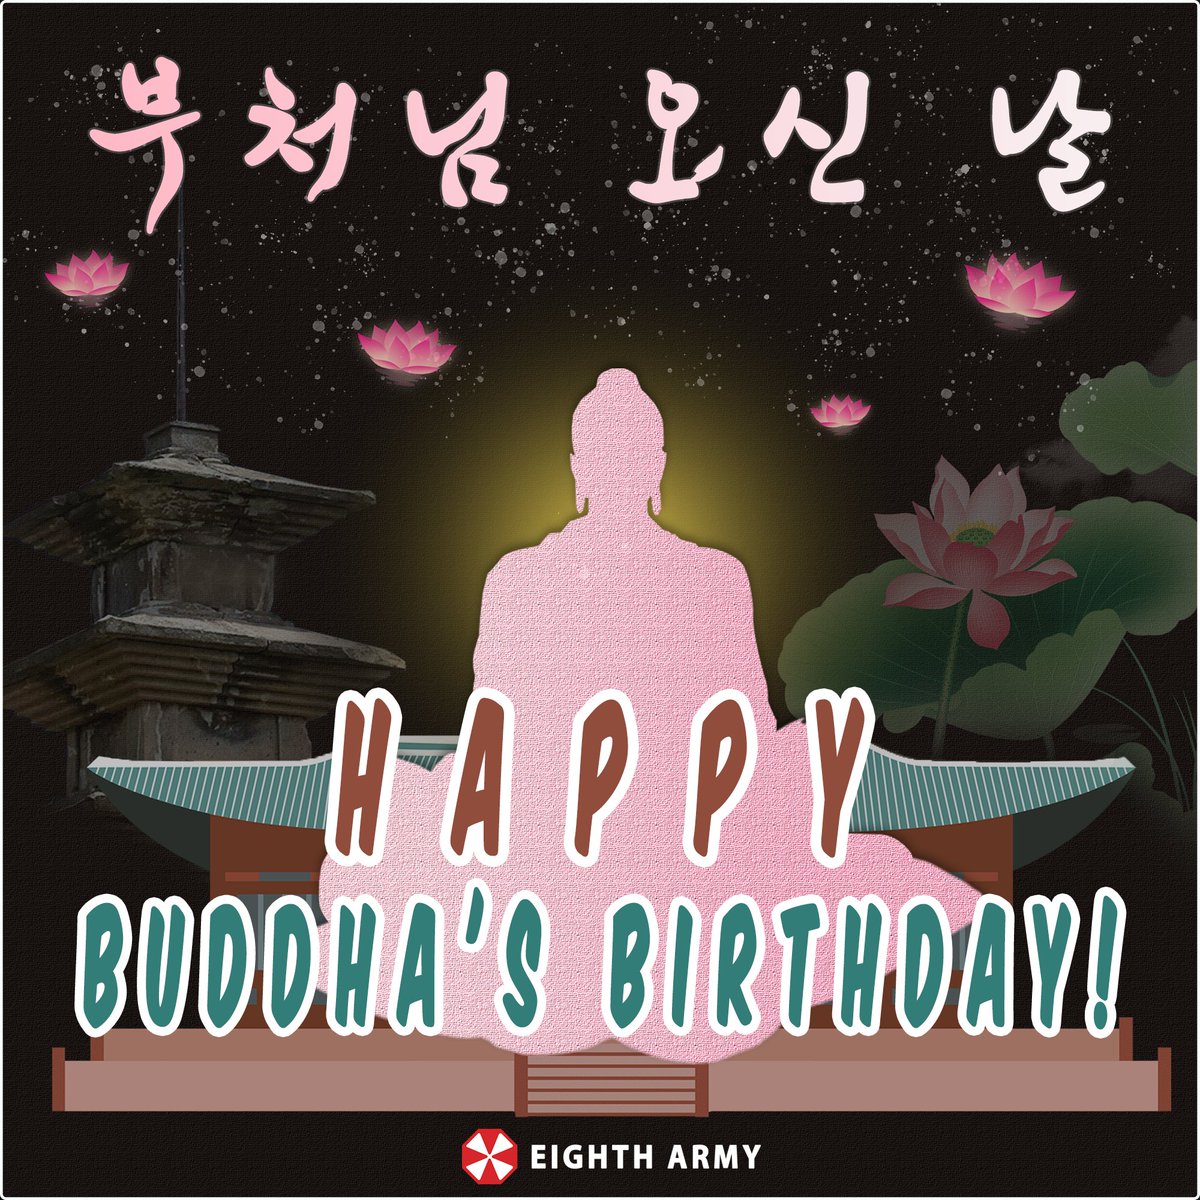 May 15 is Buddha’s Birthday and is holiday in Korea. Buddhism is one of the main religions of South Korea arriving in the 4th century. There are temples all around you can visit. The Korean word for Buddha is 석가 (seokga) and the word for Buddhism is 불교 (bulgyo).